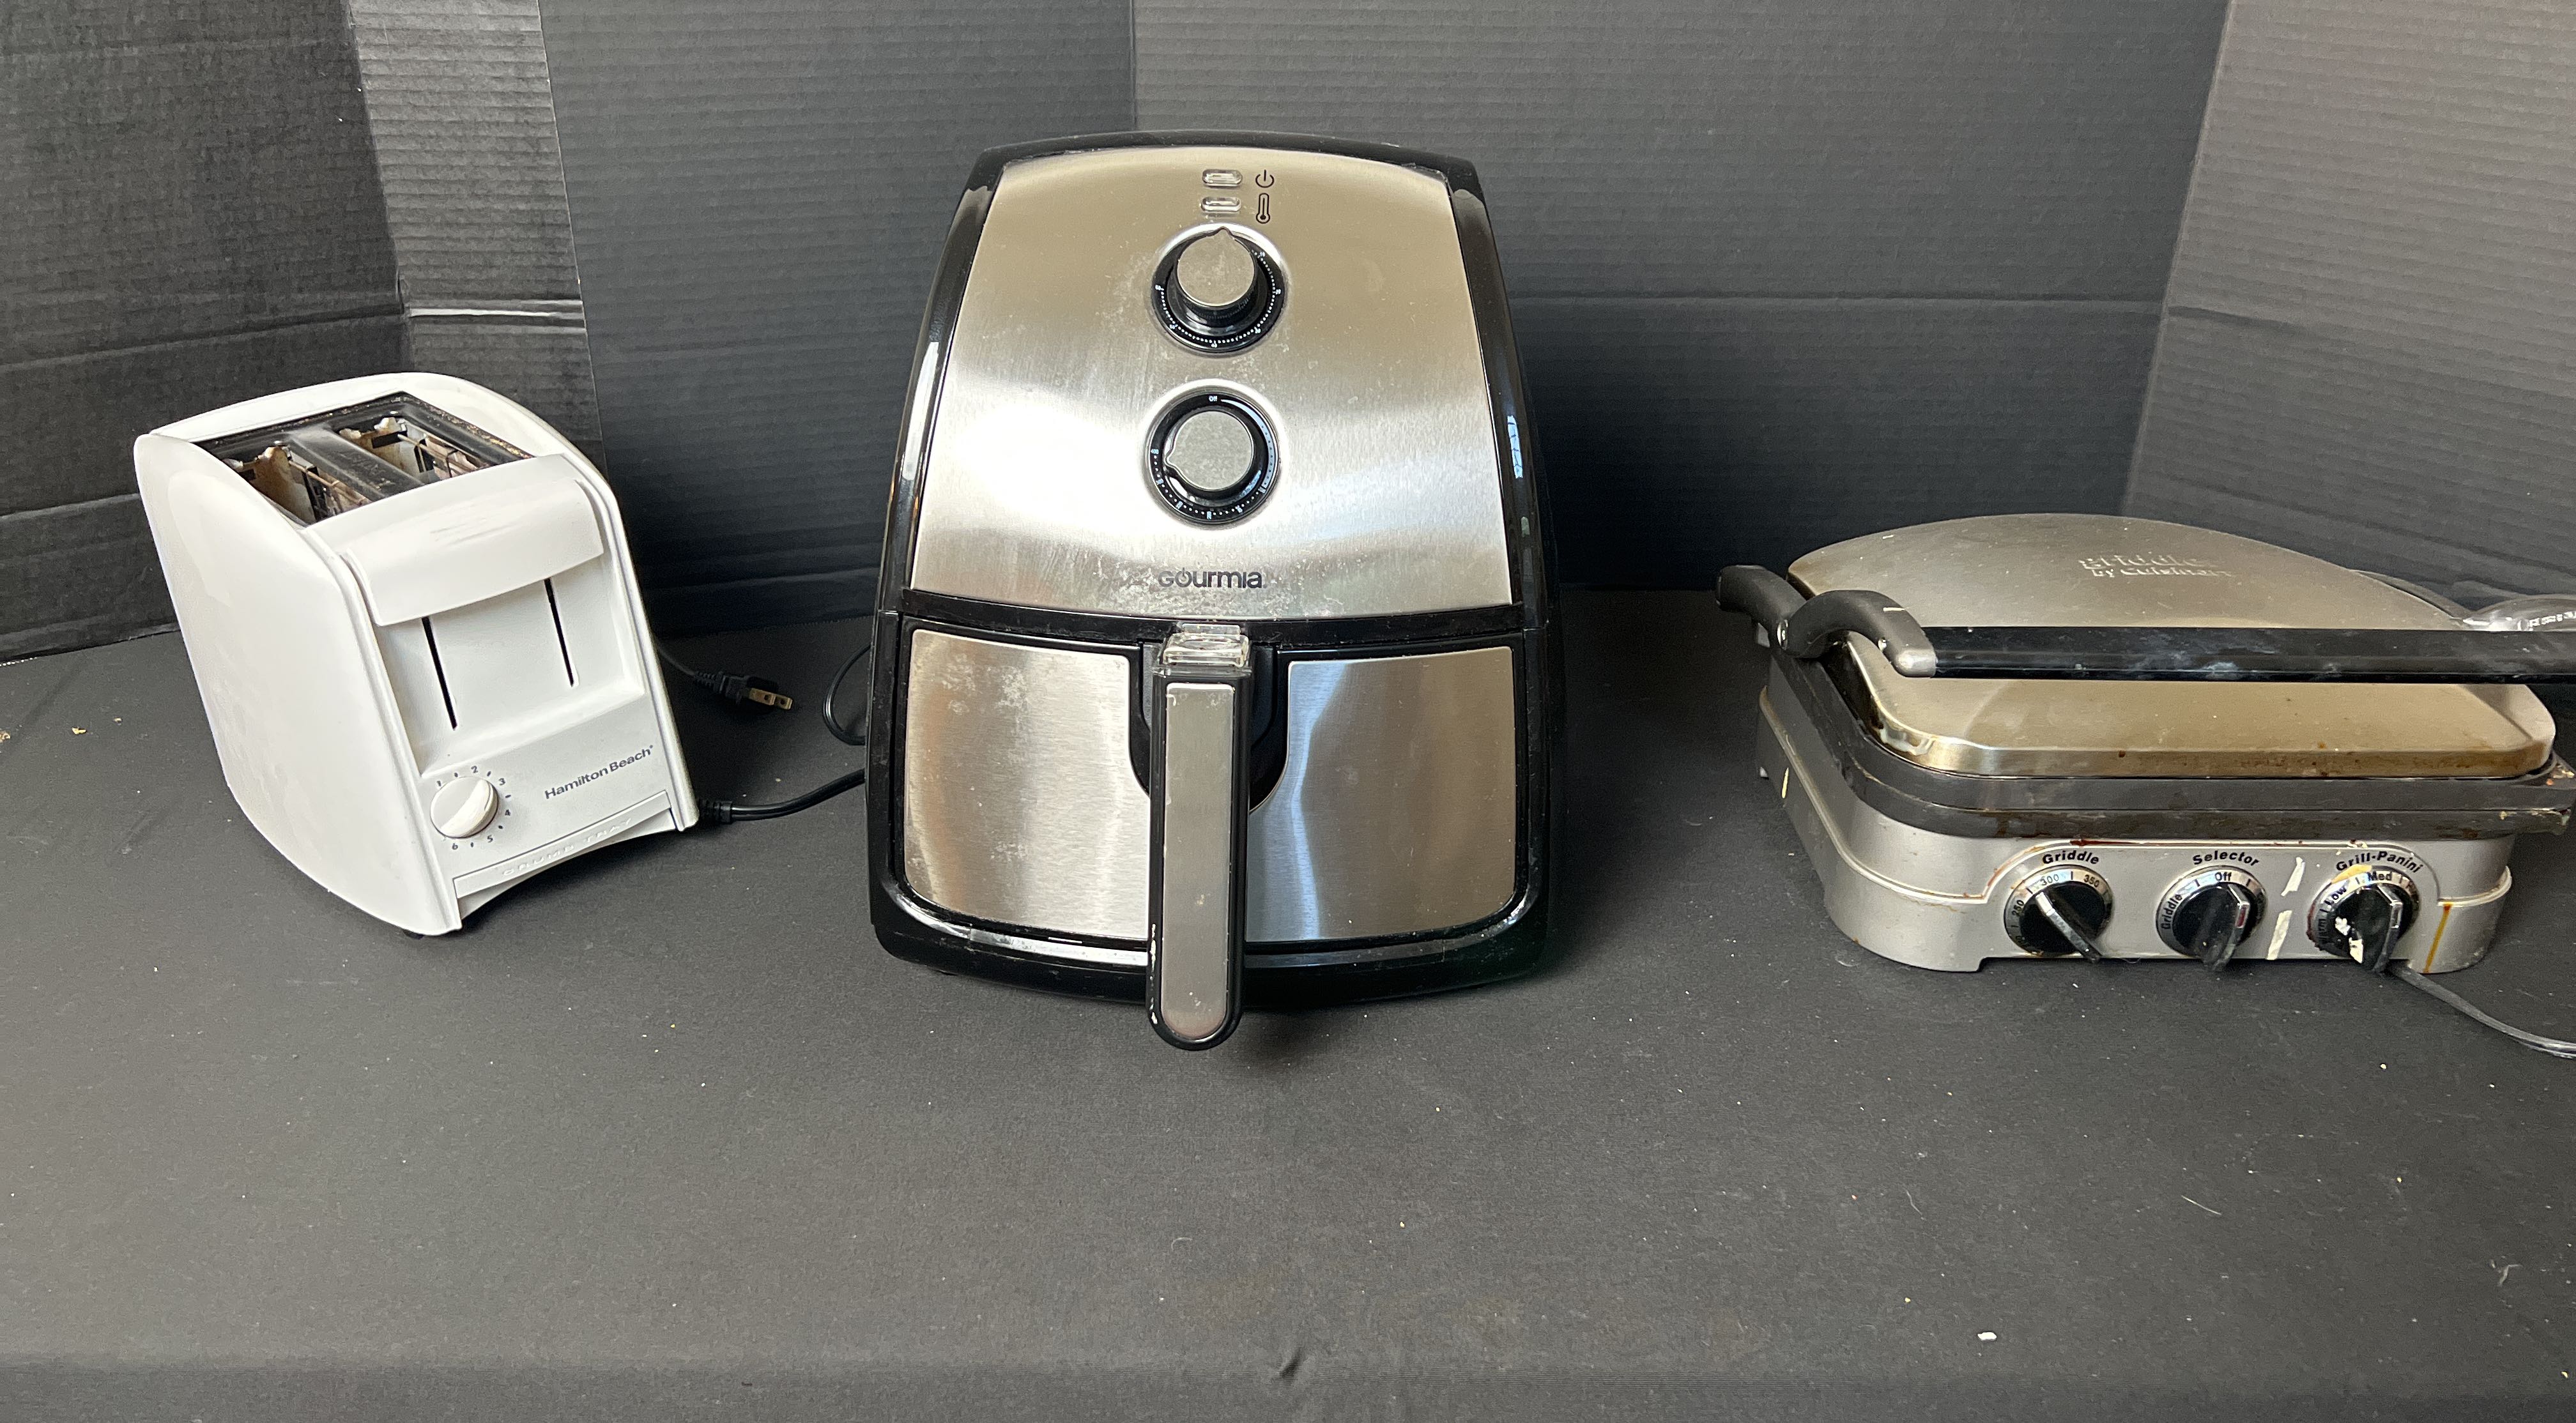 I tested griller function of this new Gourmia air fryer, griddle, gril